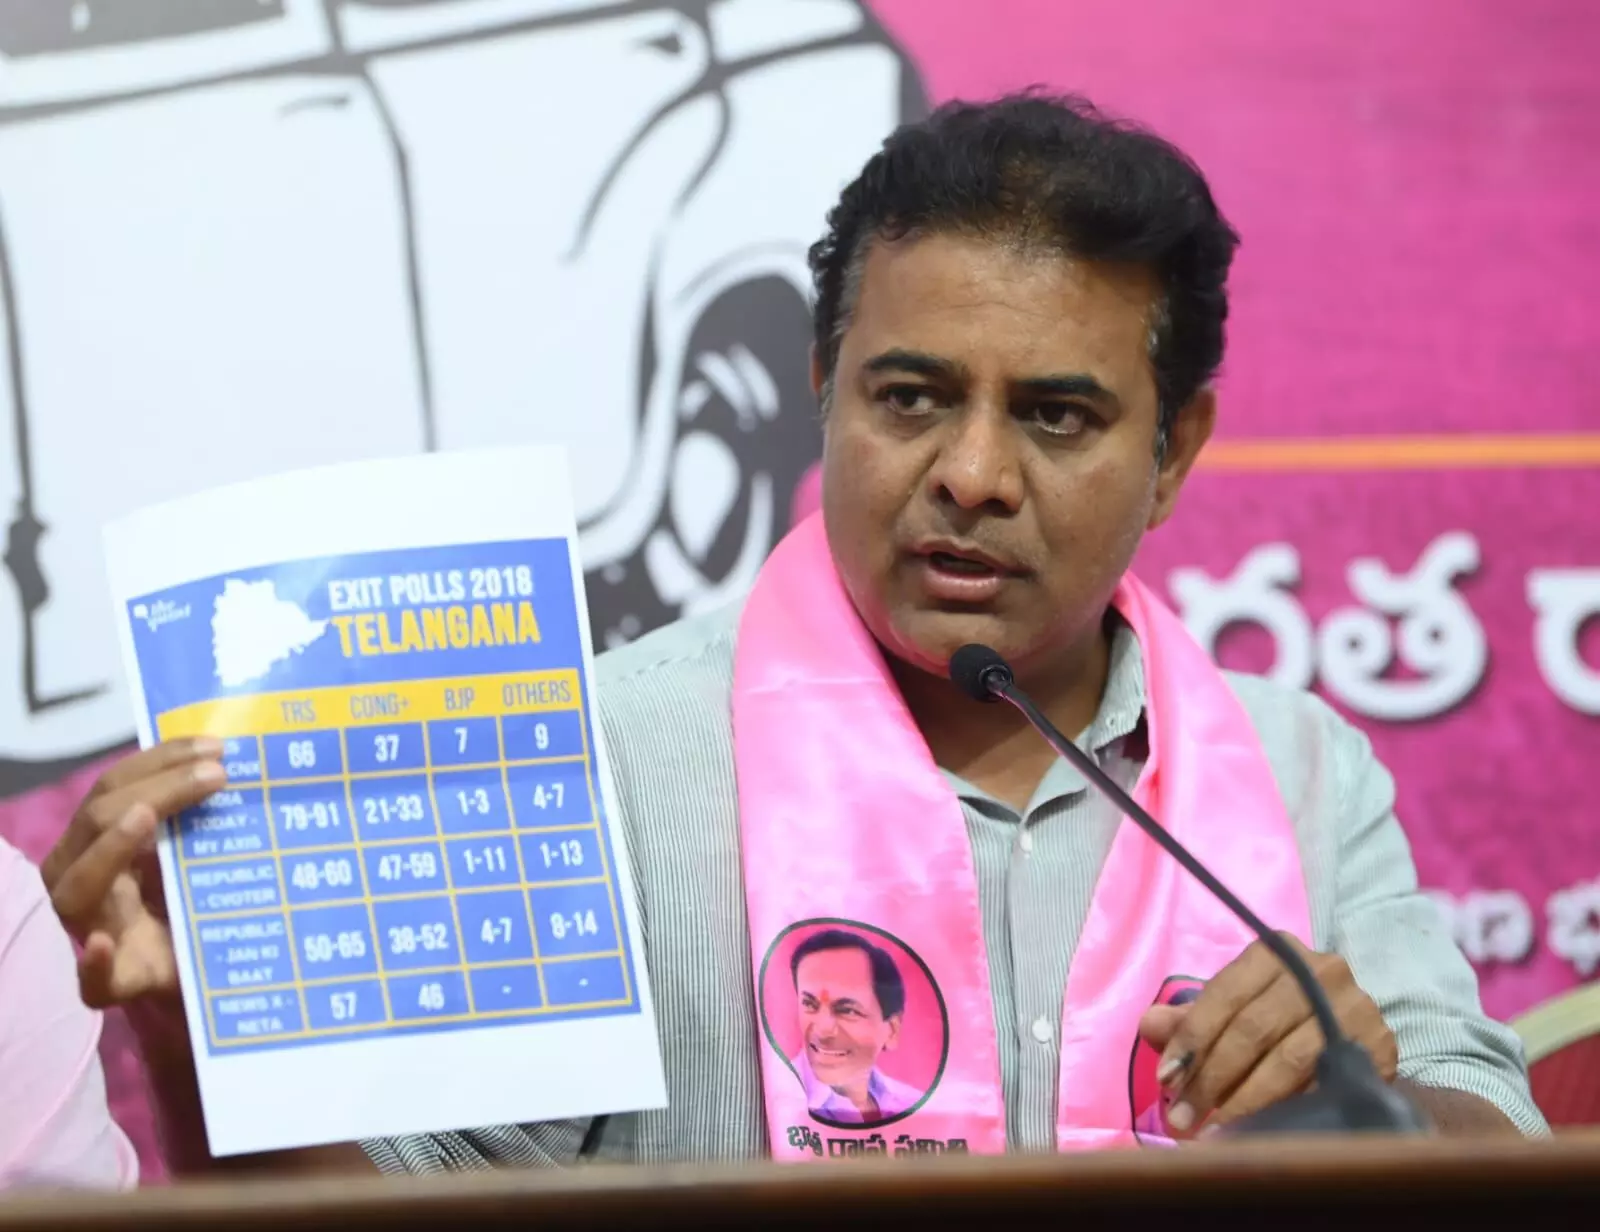 KTR confident of winning over 70 seats, condemns release of exit polls before voting ends